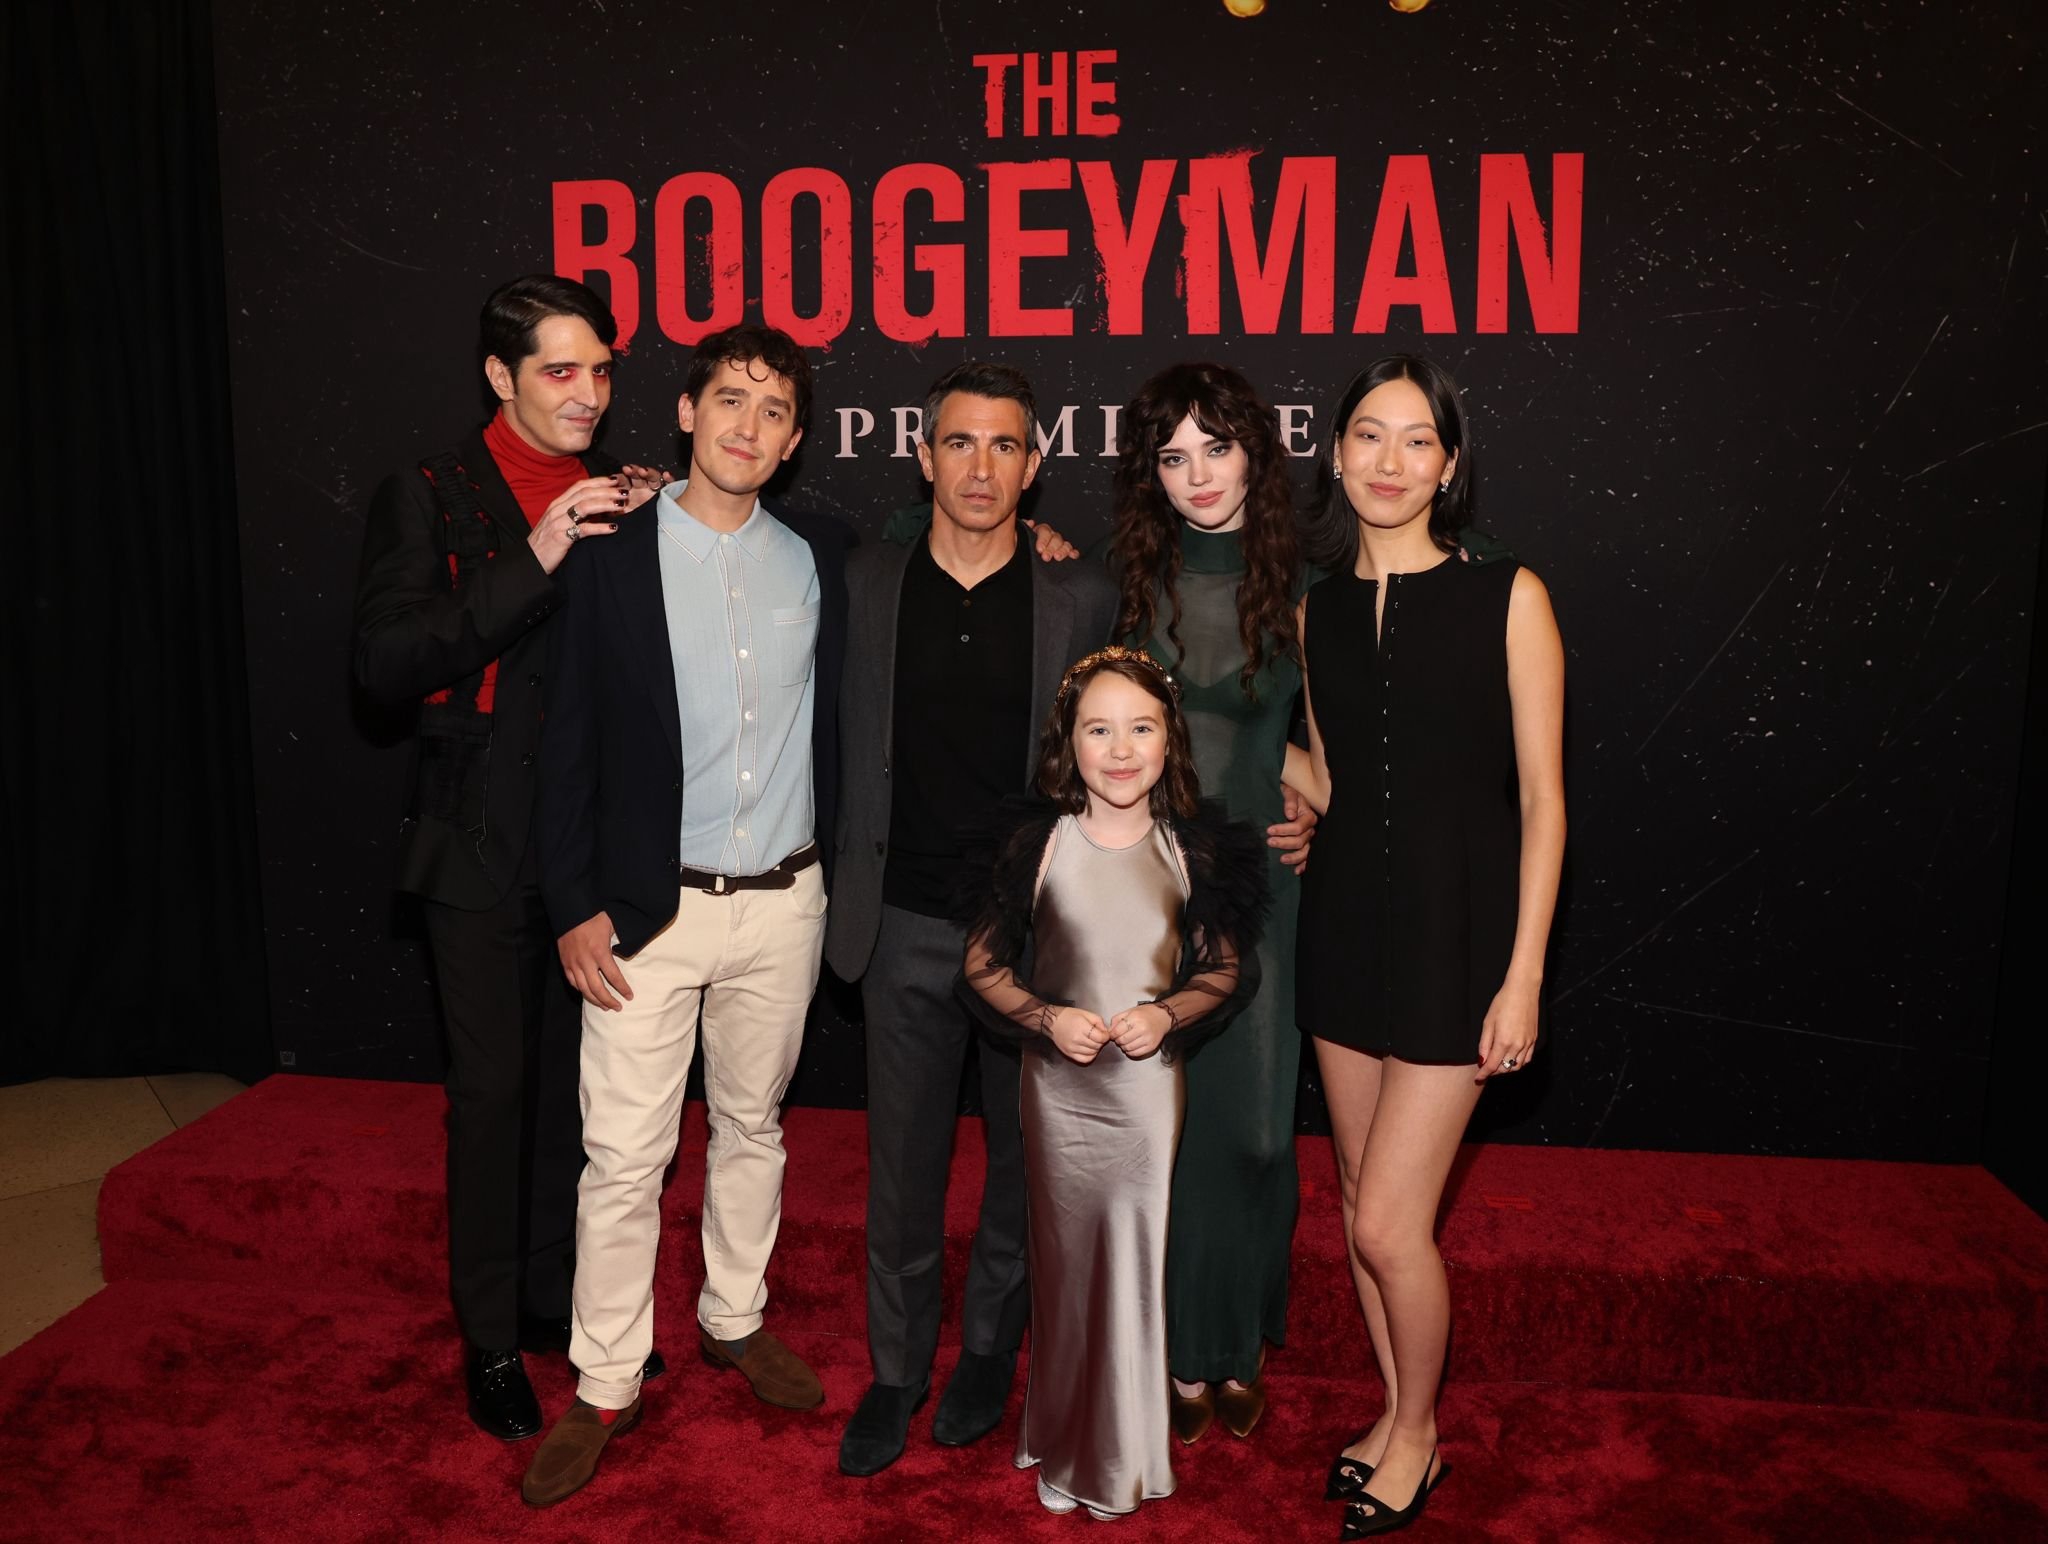 (L-R) David Dastmalchian, Rob Savage, Chris Messina, Vivien Lyra Blair, Sophie Thatcher and Madison Hu attend the premiere of "The Boogeyman" at El Capitan Theatre in Hollywood, California on May 23, 2023.